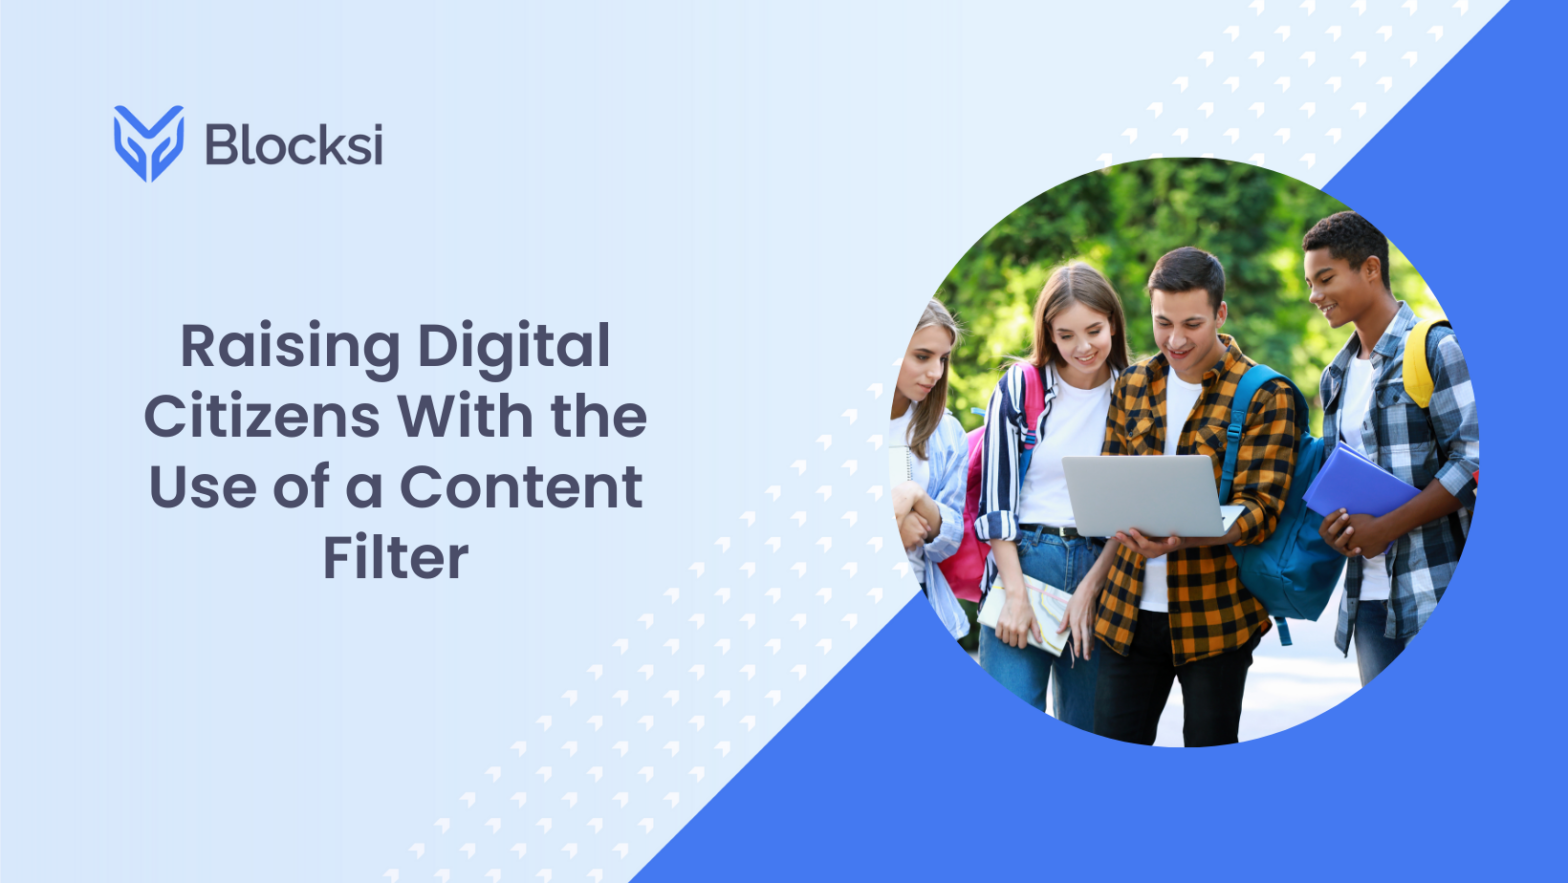 Raising Digital Citizens With the Use of a Content Filter